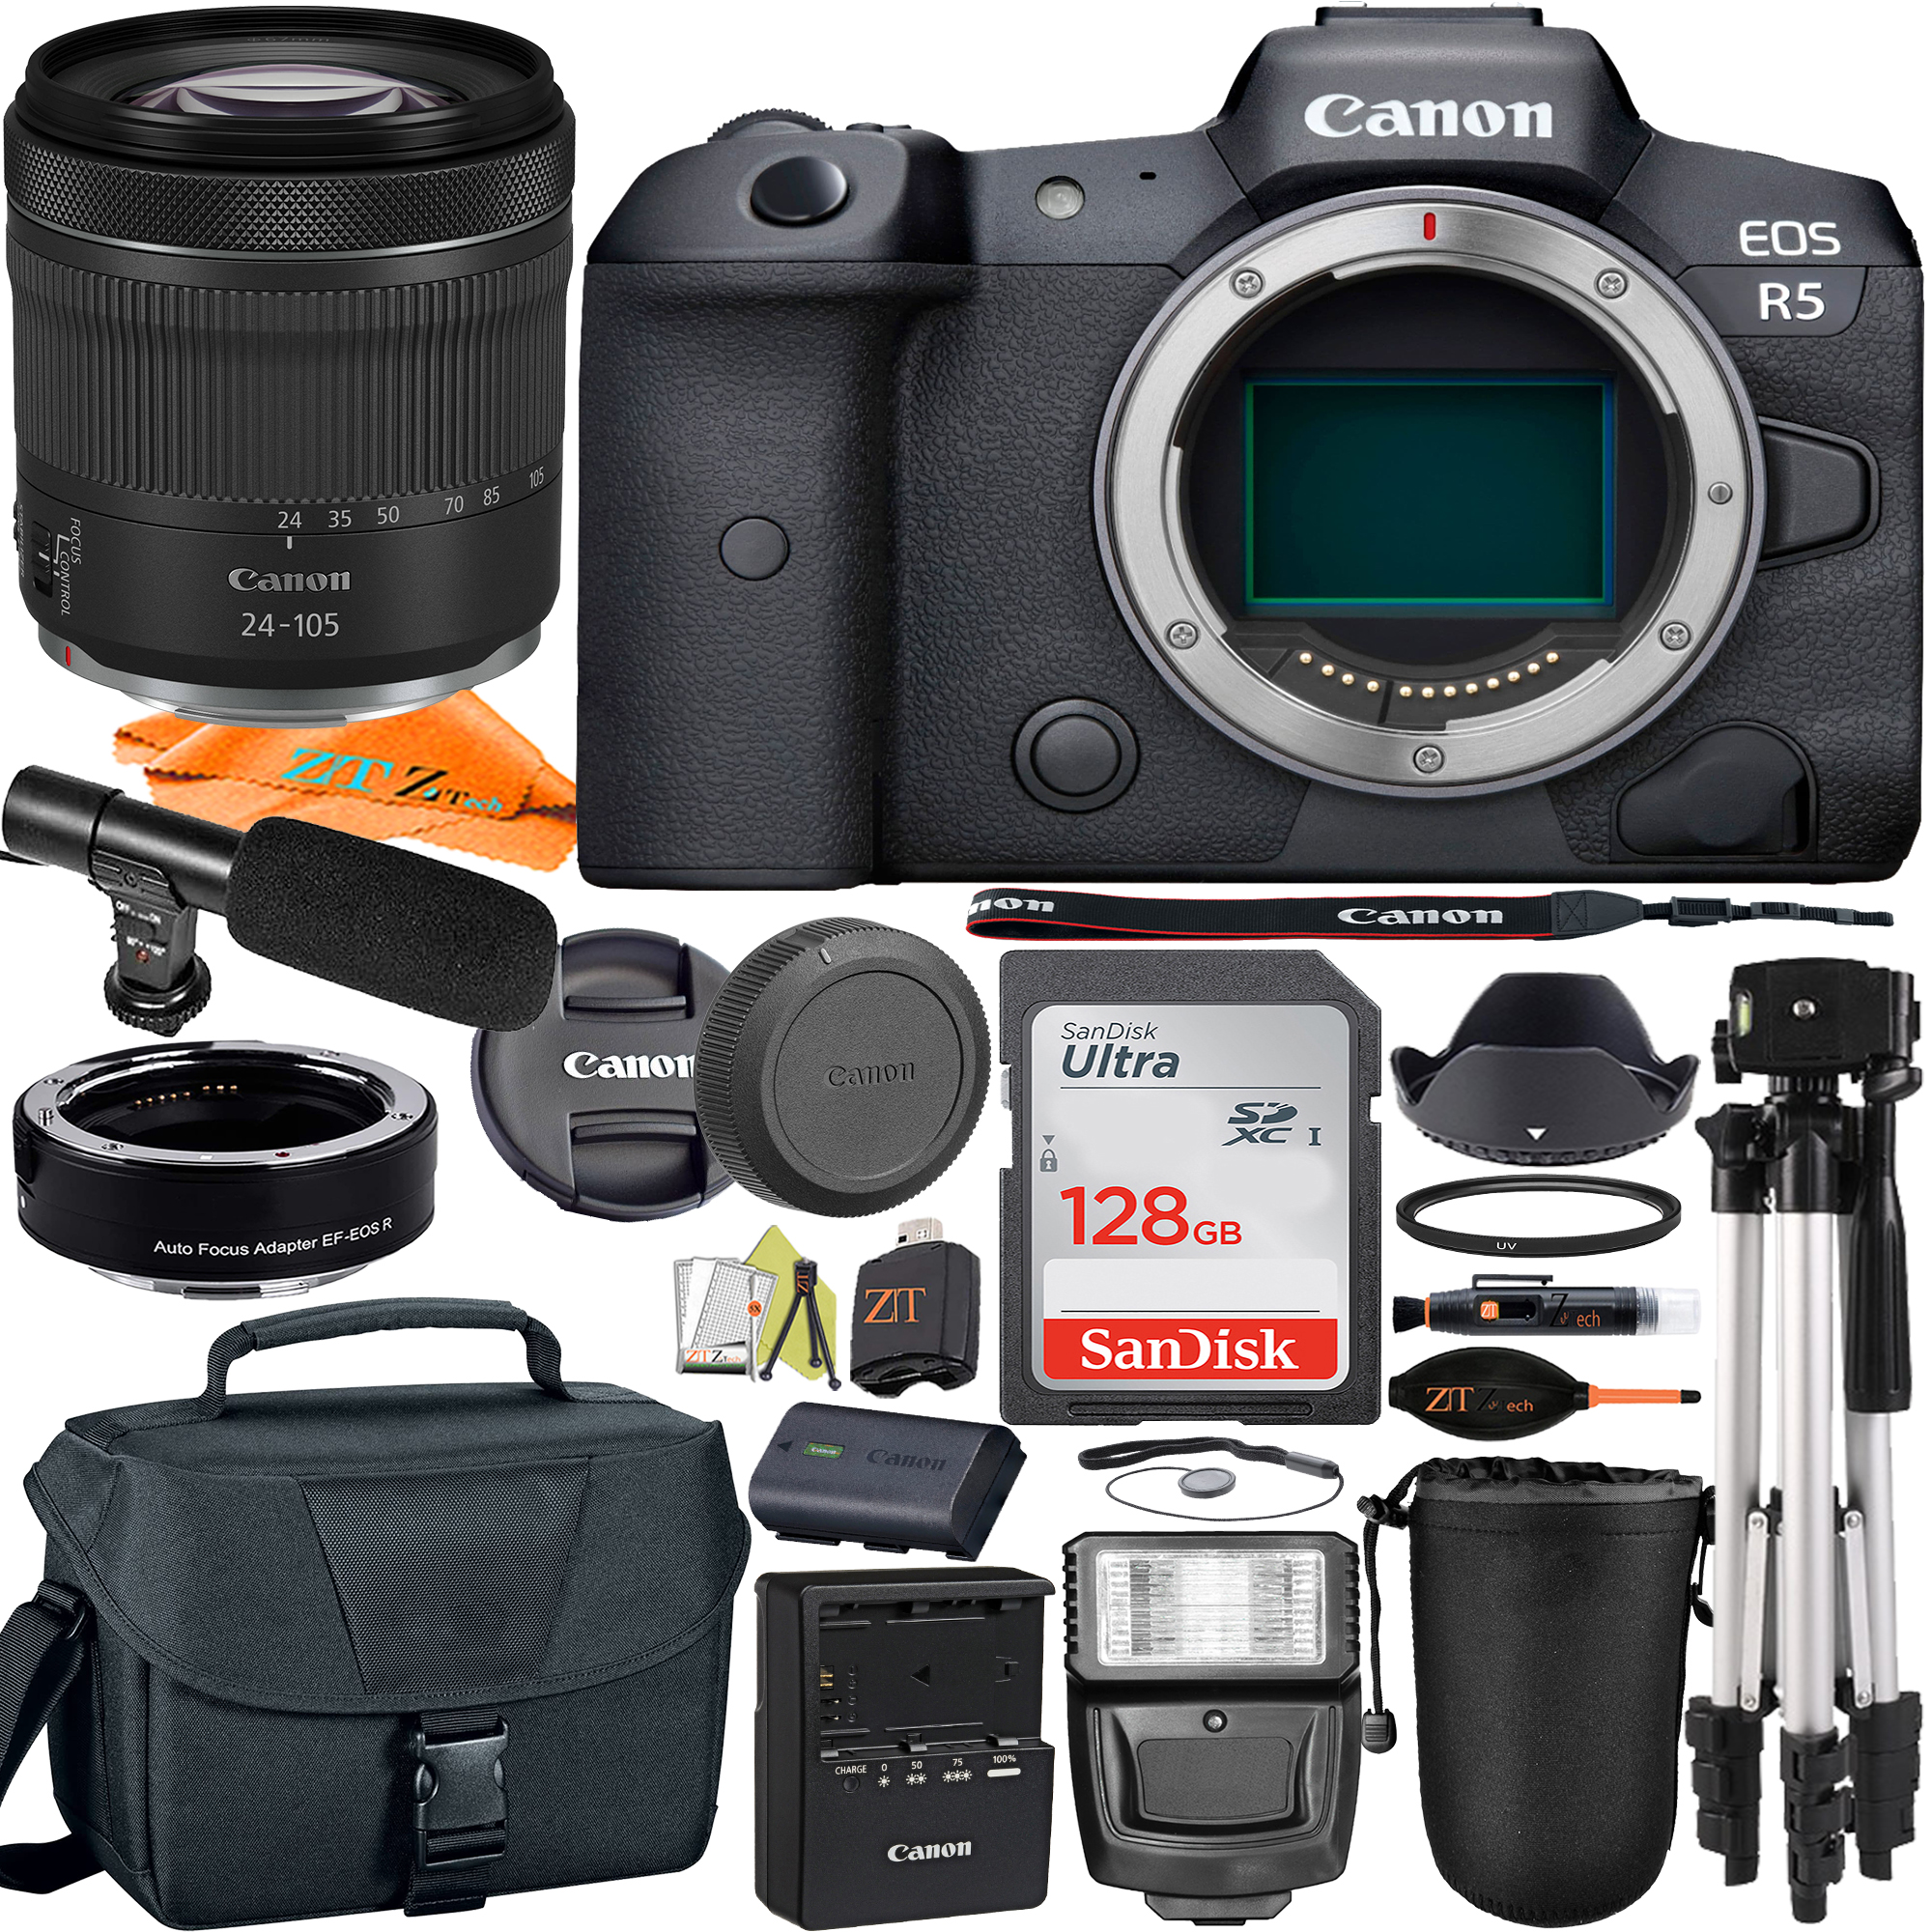 Canon EOS R5 Mirrorless Digital Camera with RF24-105mm Lens + Mount Adapter + SanDisk 128GB + ZeeTech Accessory Bundle